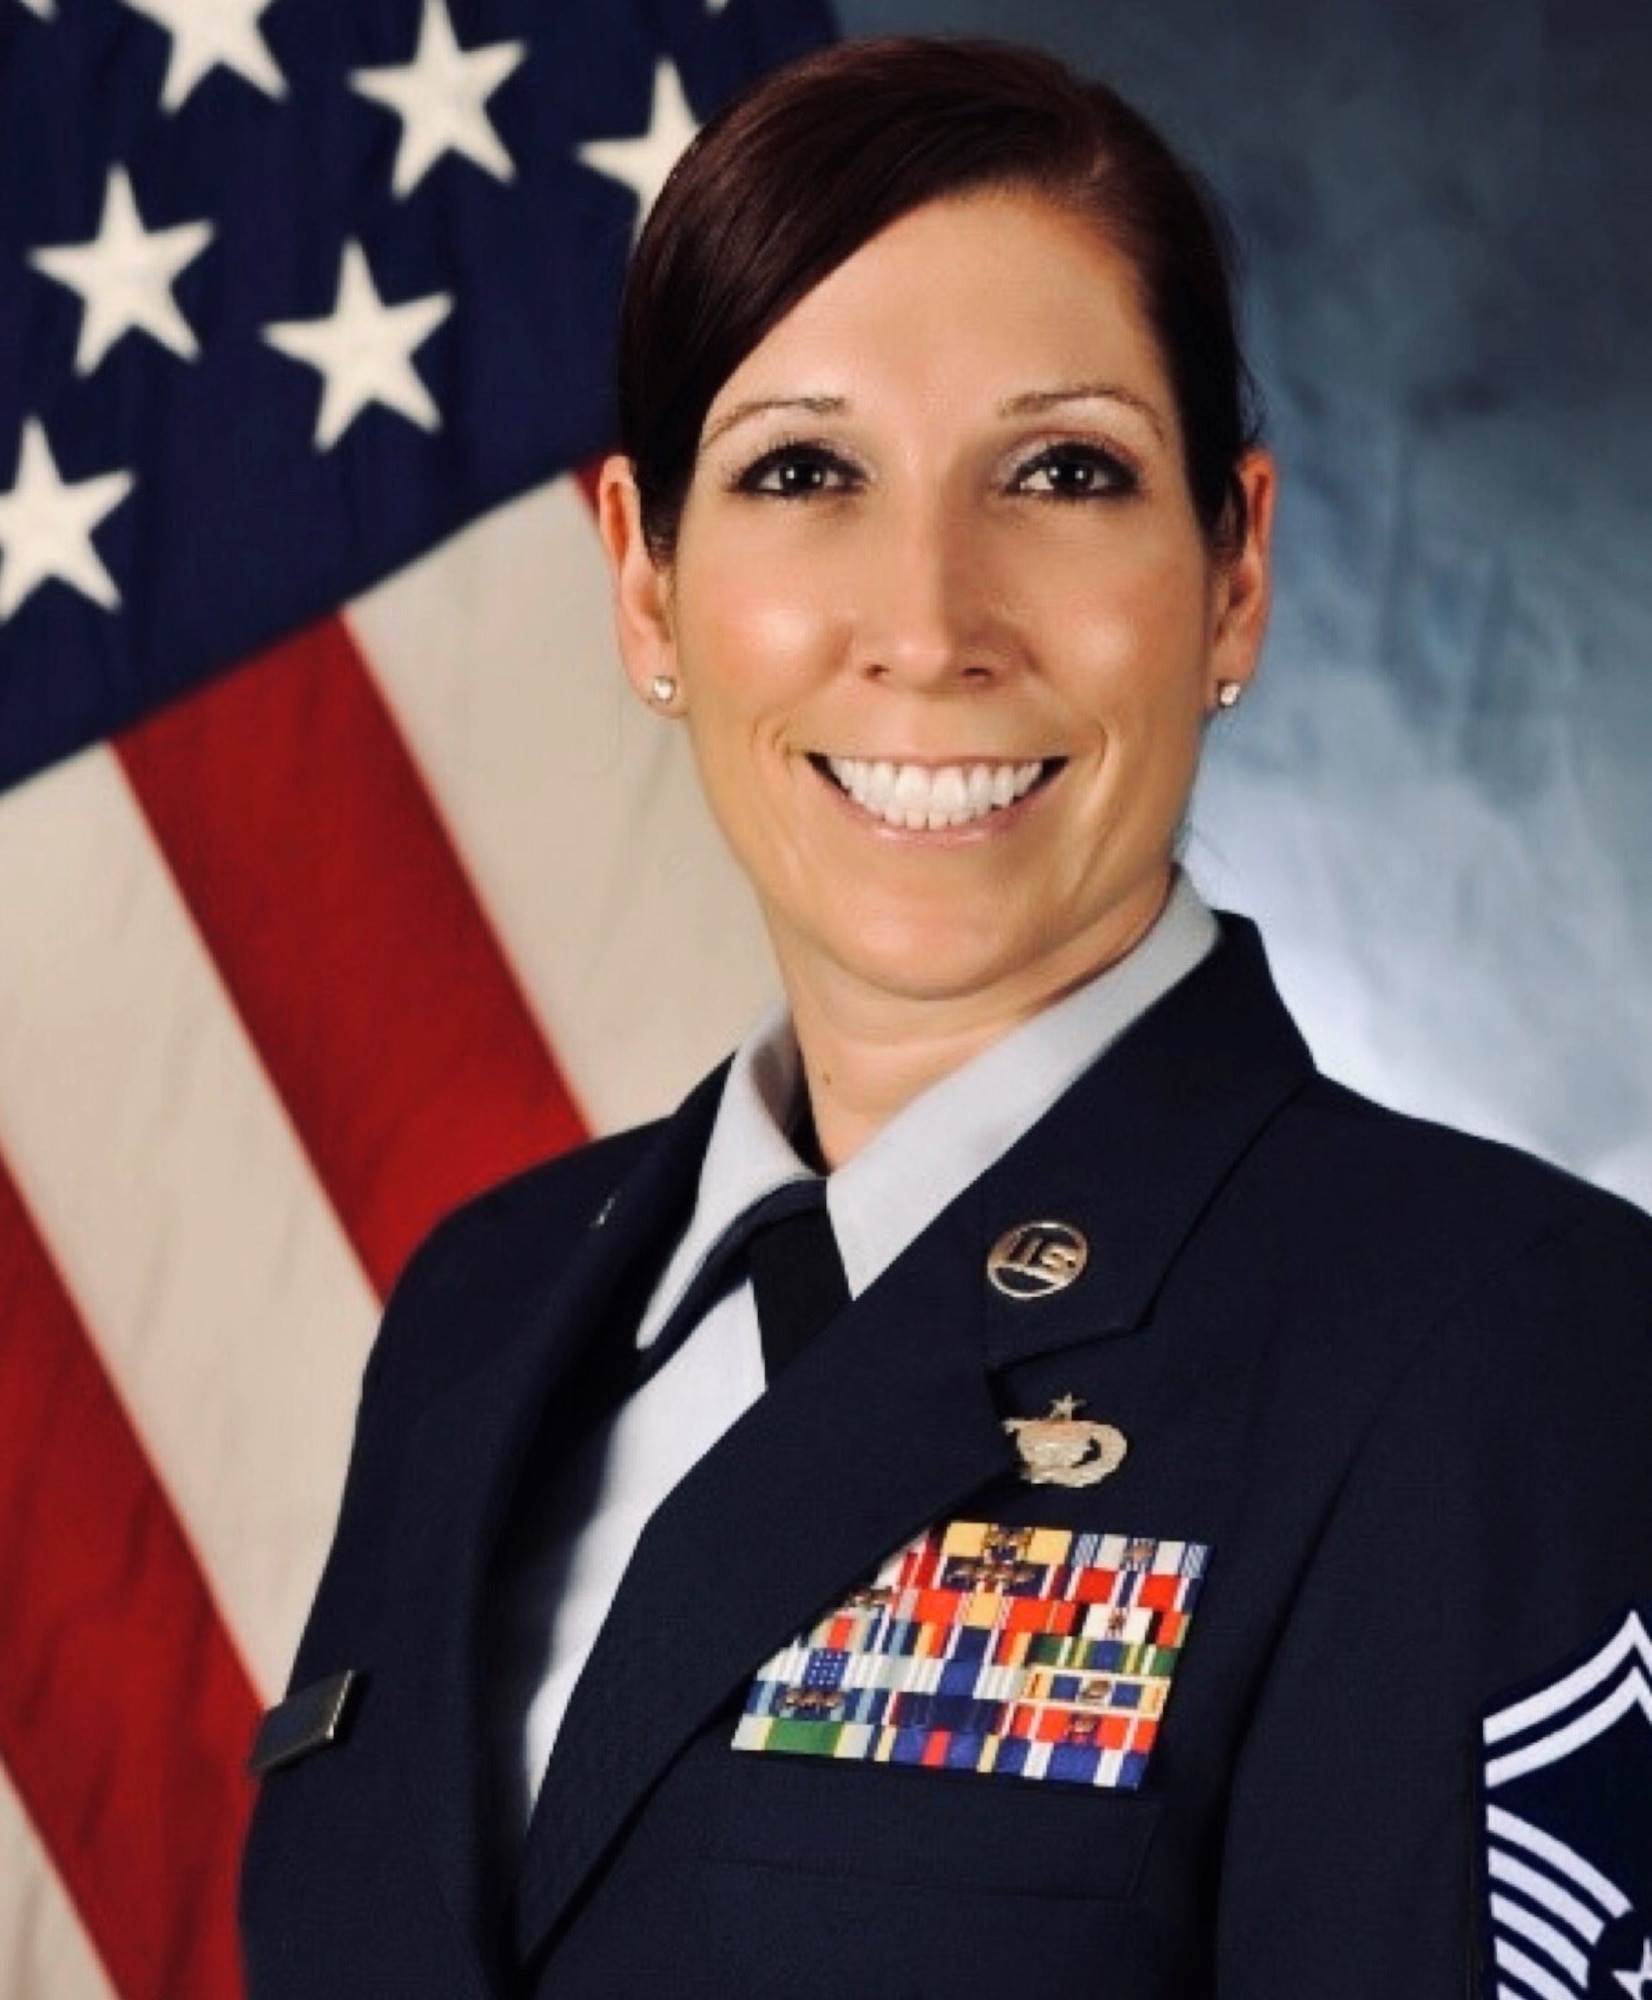 U.S. Air Force Senior Master Sgt. Tracy Bennett, 435th Air Expeditionary Wing senior enlisted leader and superintendent of expeditionary manpower and organization, poses in an official photo, Ramstein Air Base, Germany, March 23, 2021. Bennett’s duties include evaluating expeditionary organization structures for effectiveness and efficiency by studying the organization’s mission, structure and workload. As a senior enlisted leader, Bennett is the liaison between the enlisted force and the director of staff. Her goals are to finish her Masters of Business Administration, retire from the Air Force and travel the world. (Courtesy Photo)